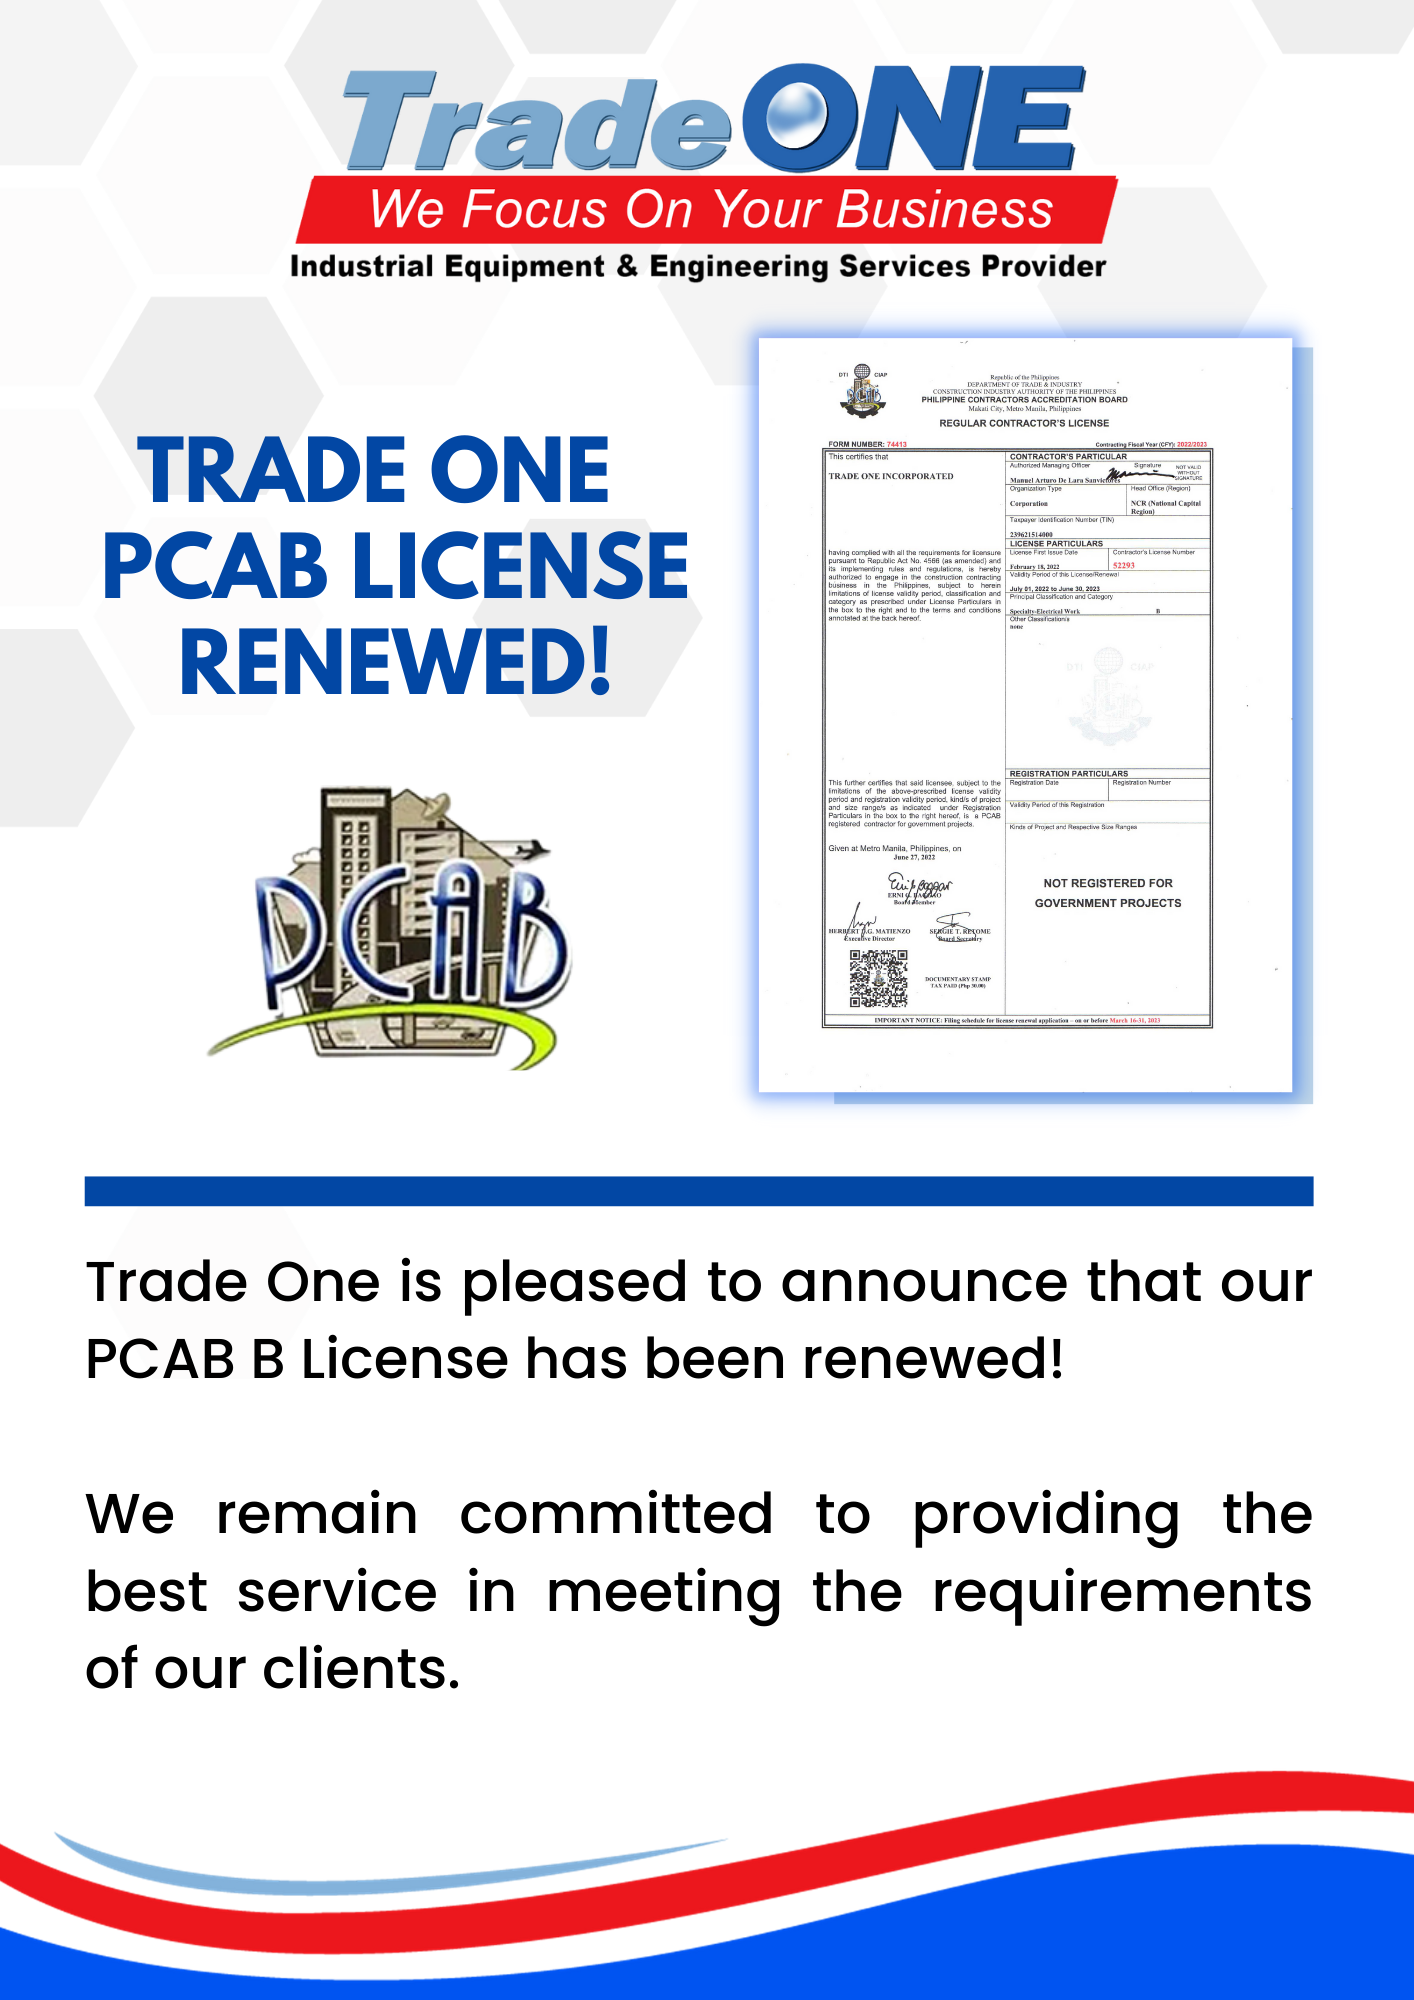 PCAB ACCREDITED APPROVED (Website News Design) (4)